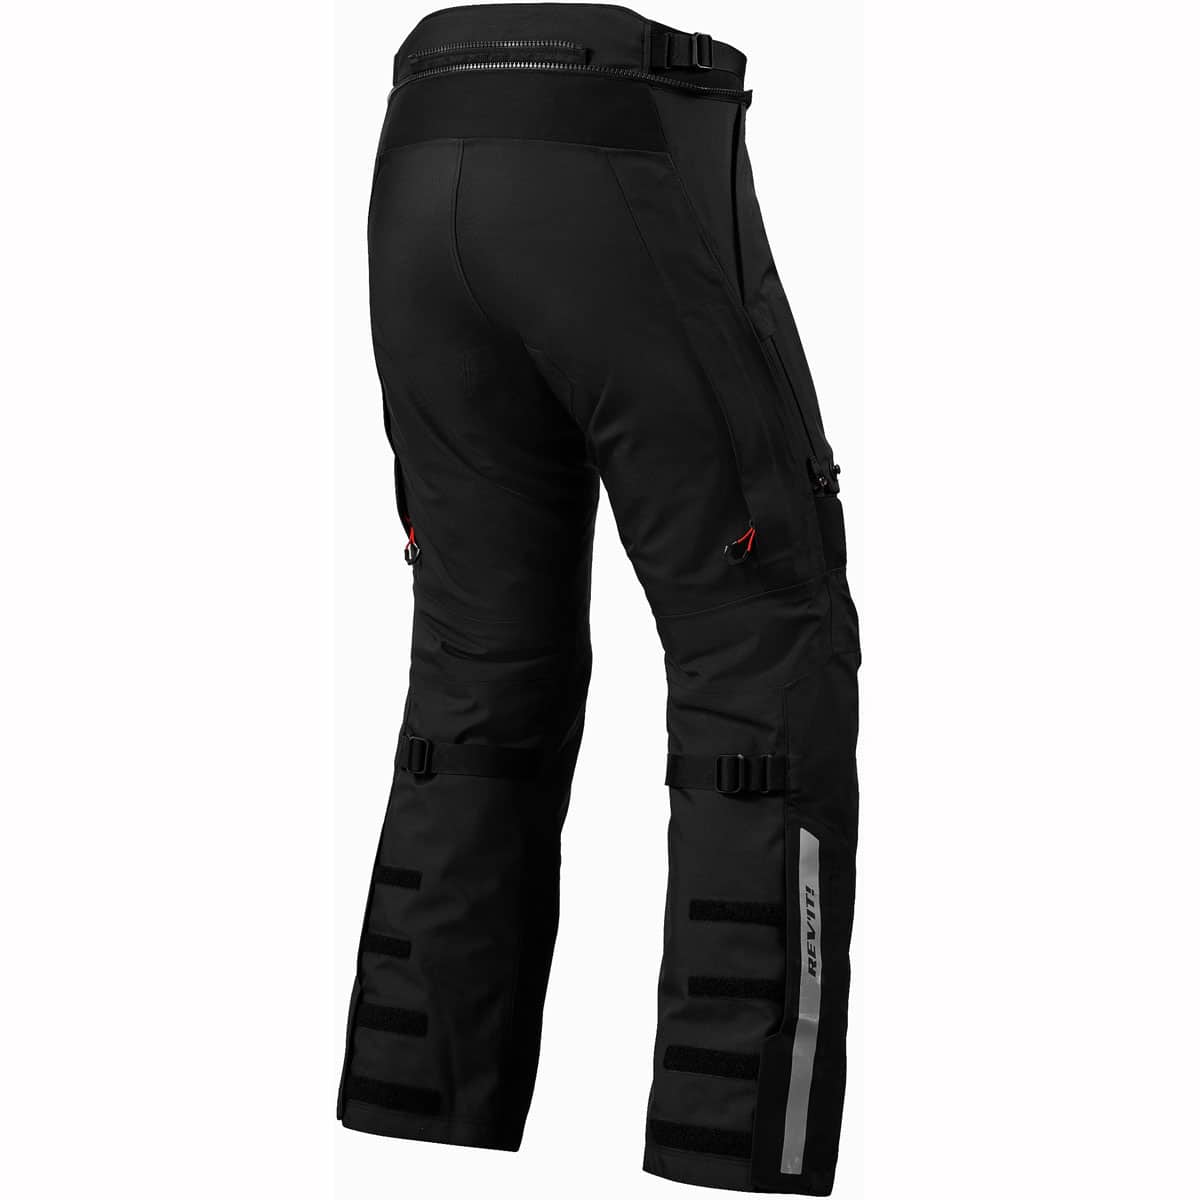 Rev It! Poseidon GTX trousers: AA-rated Gore-Tex laminated motorcycle touring trousers - back